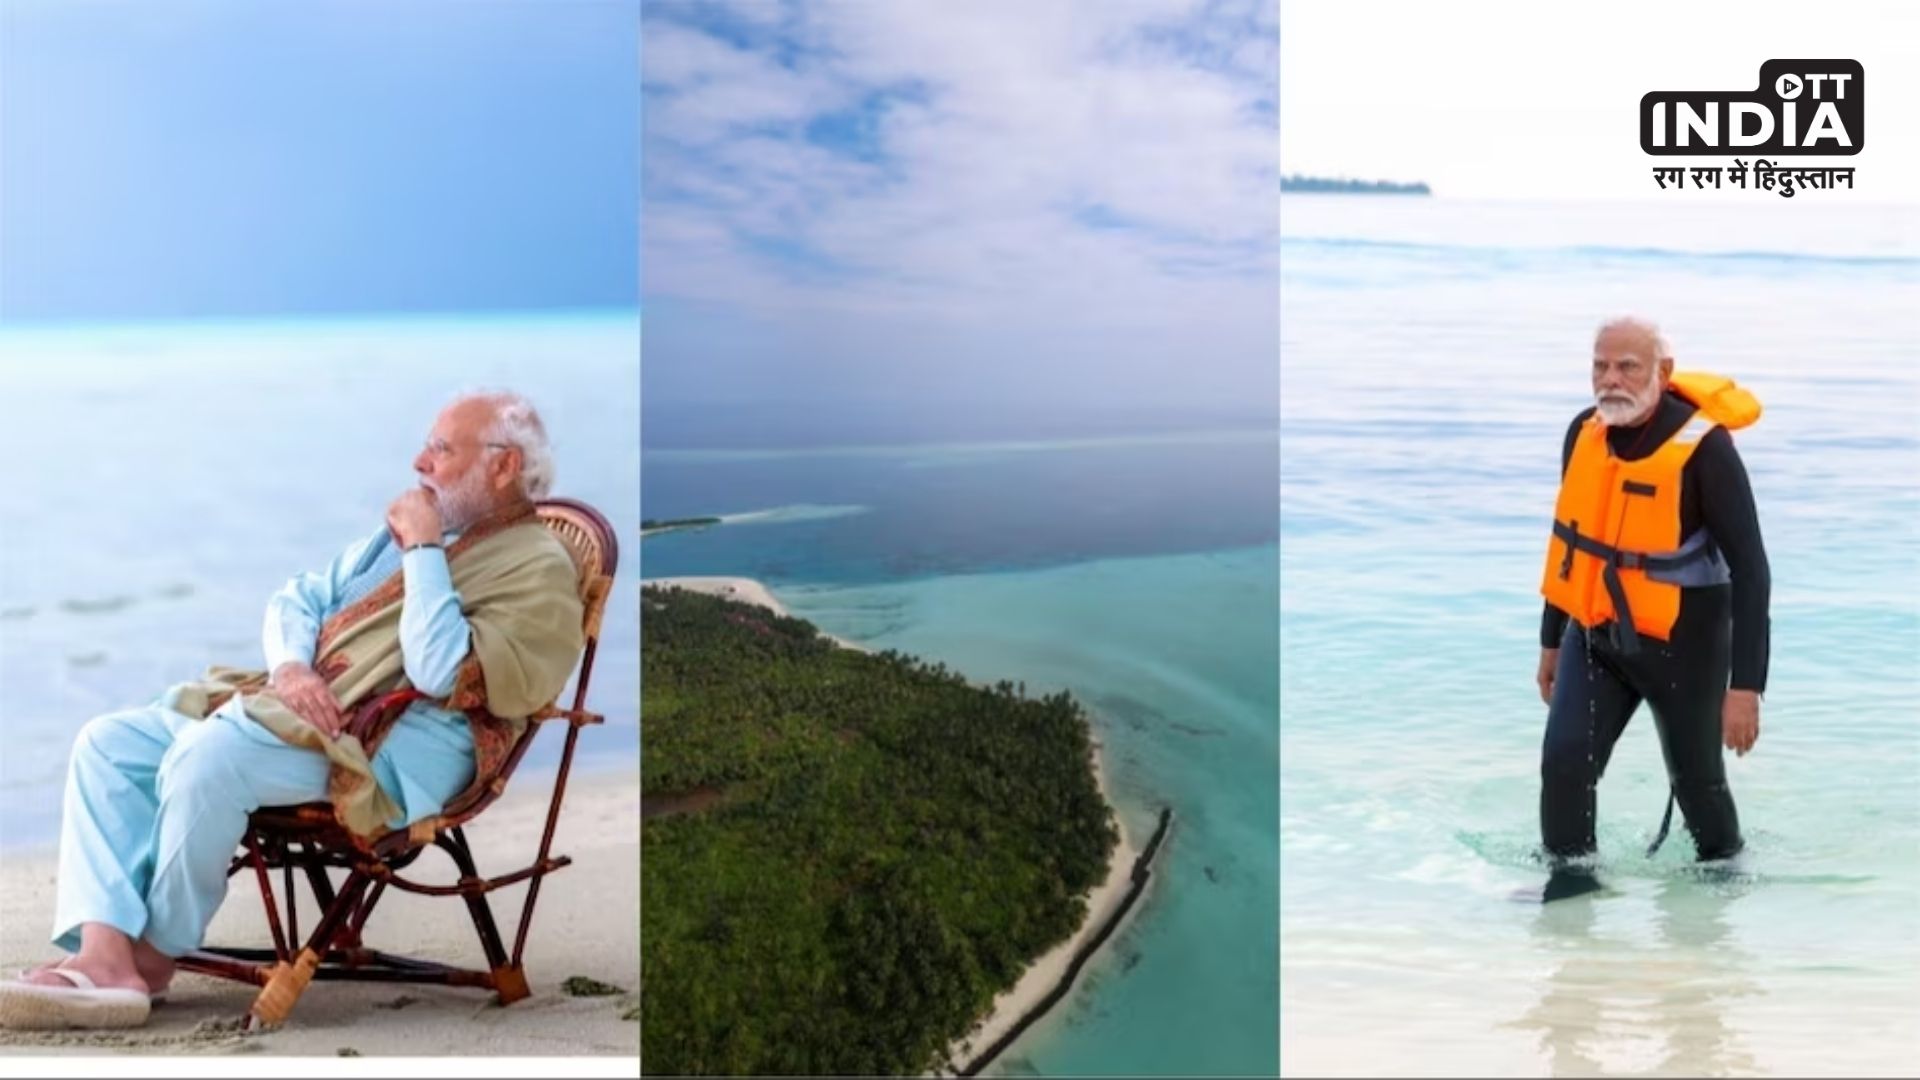 here understand full story of India Maldives Controversy after PM Modi Visit in Lakshadweep